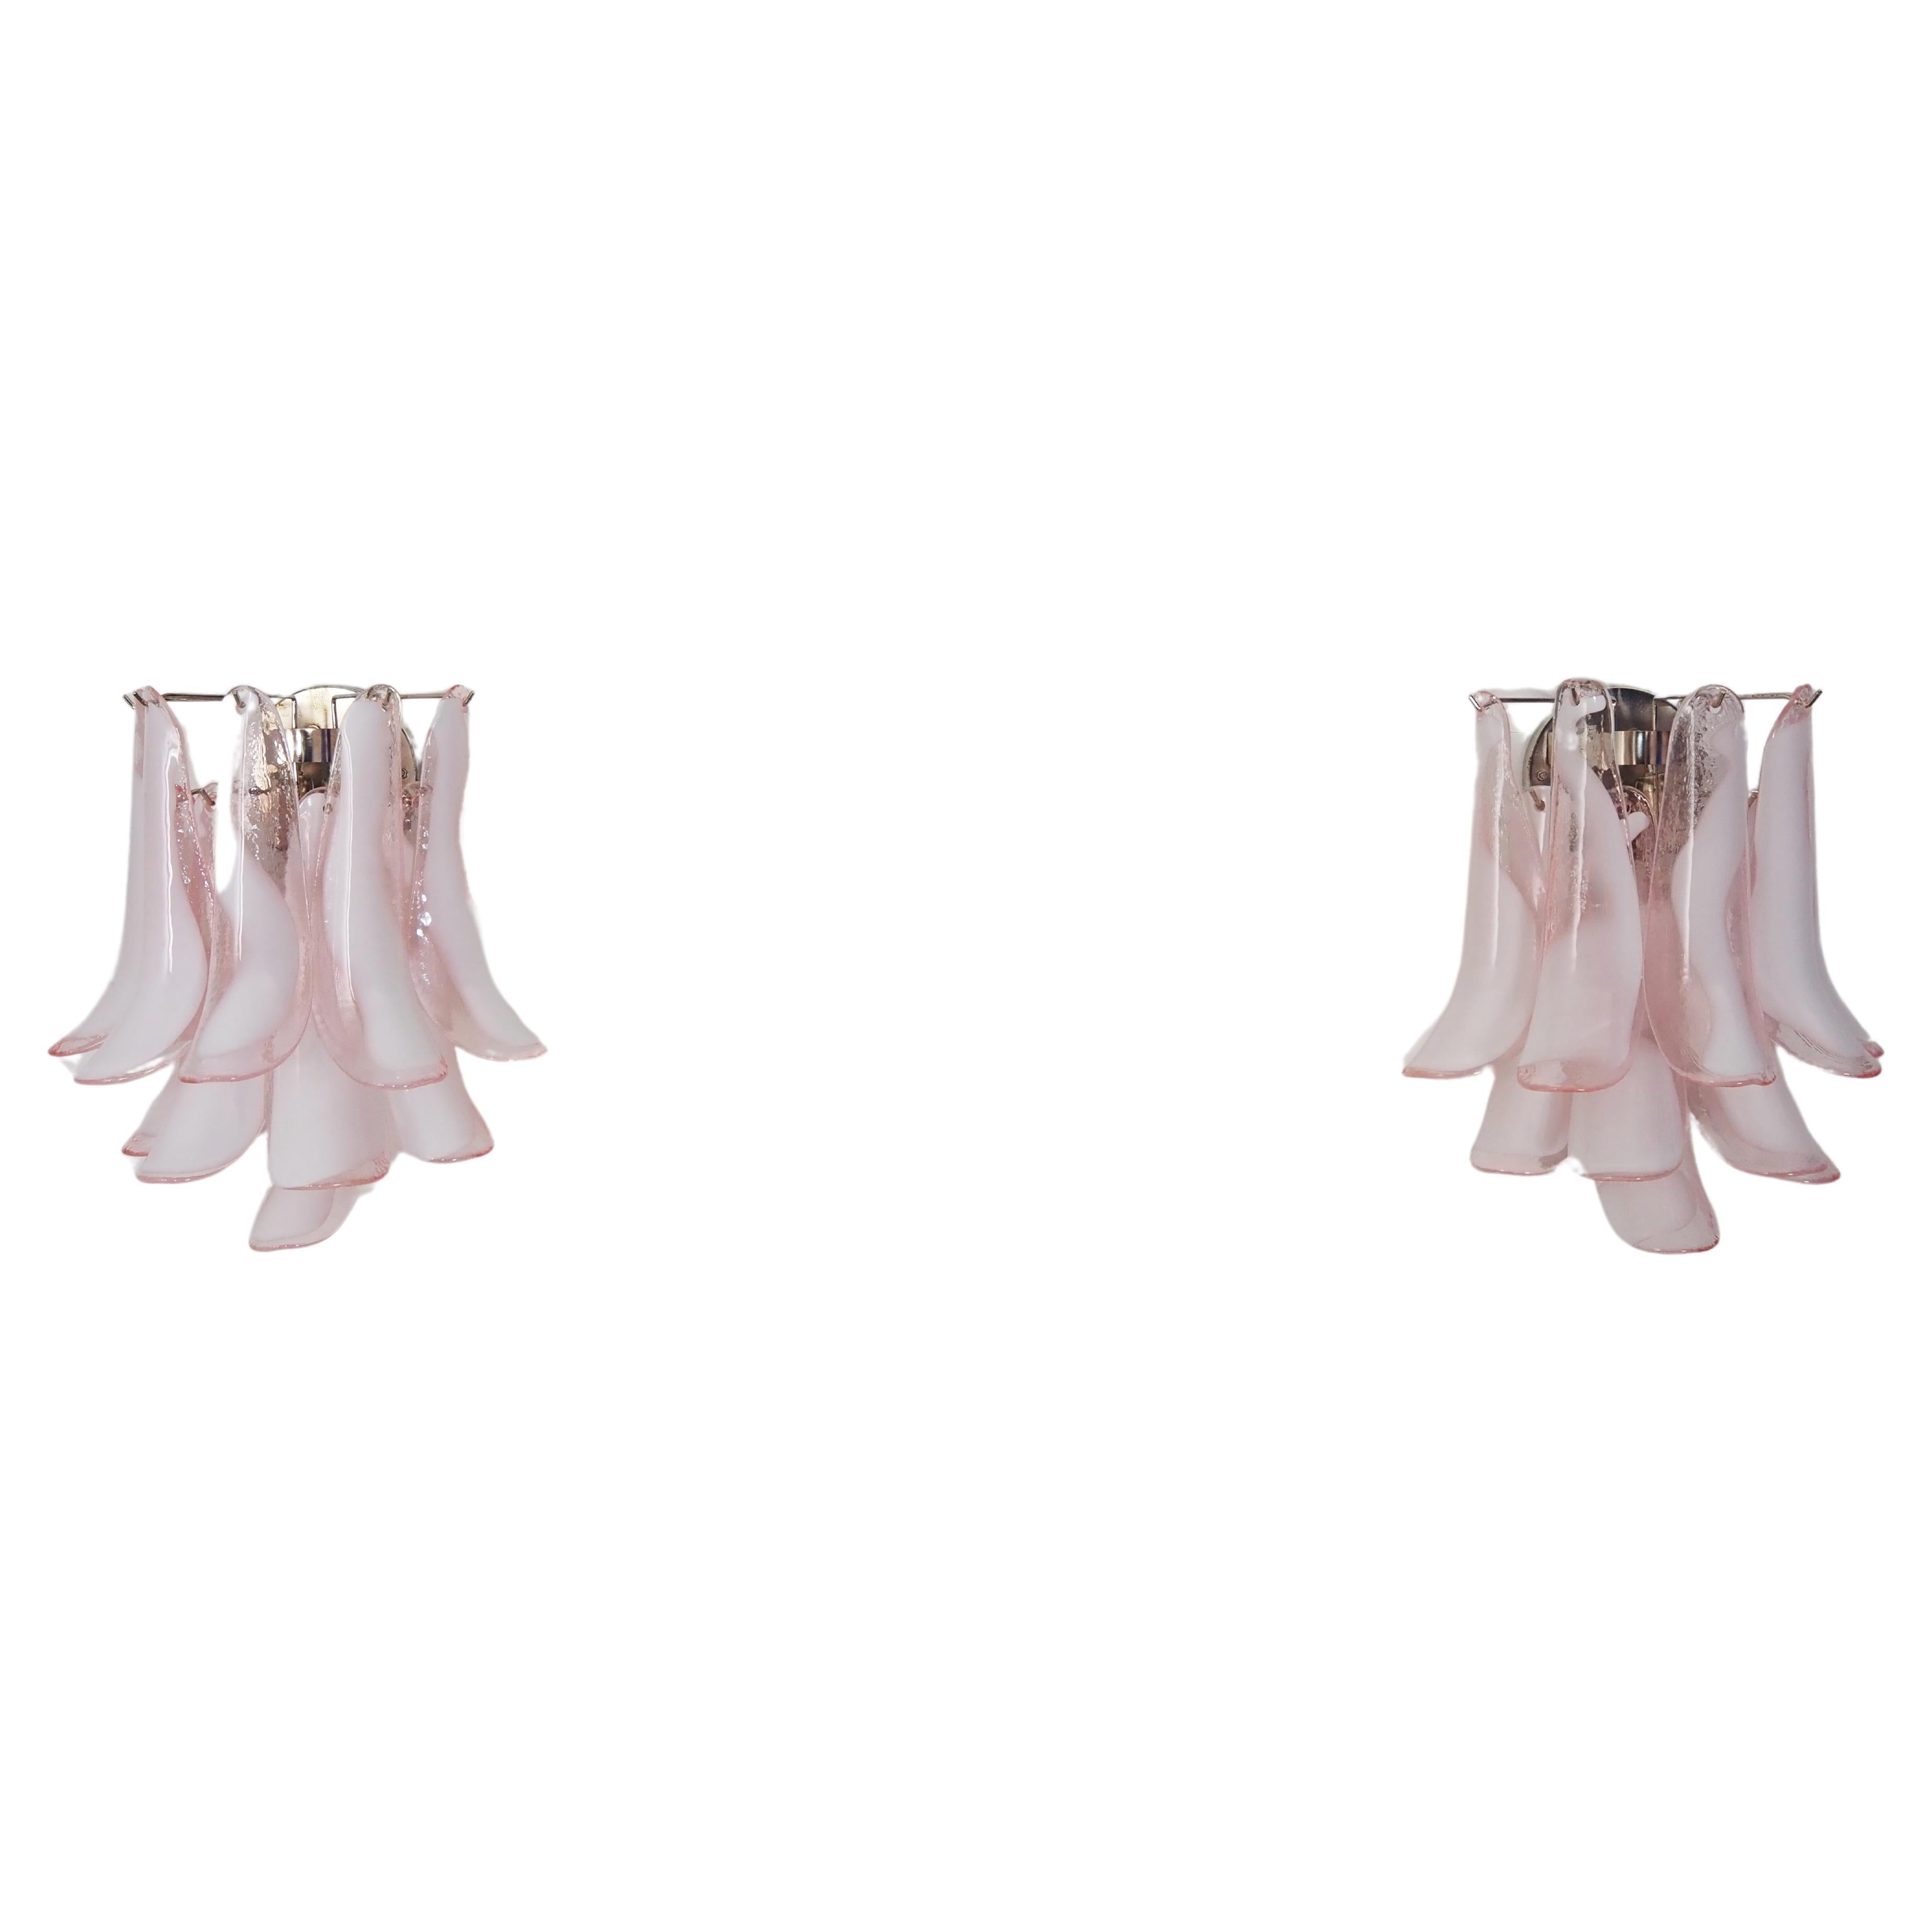 Pair of Vintage Italian Murano wall lights in the manner of Mazzega - 10 pink la